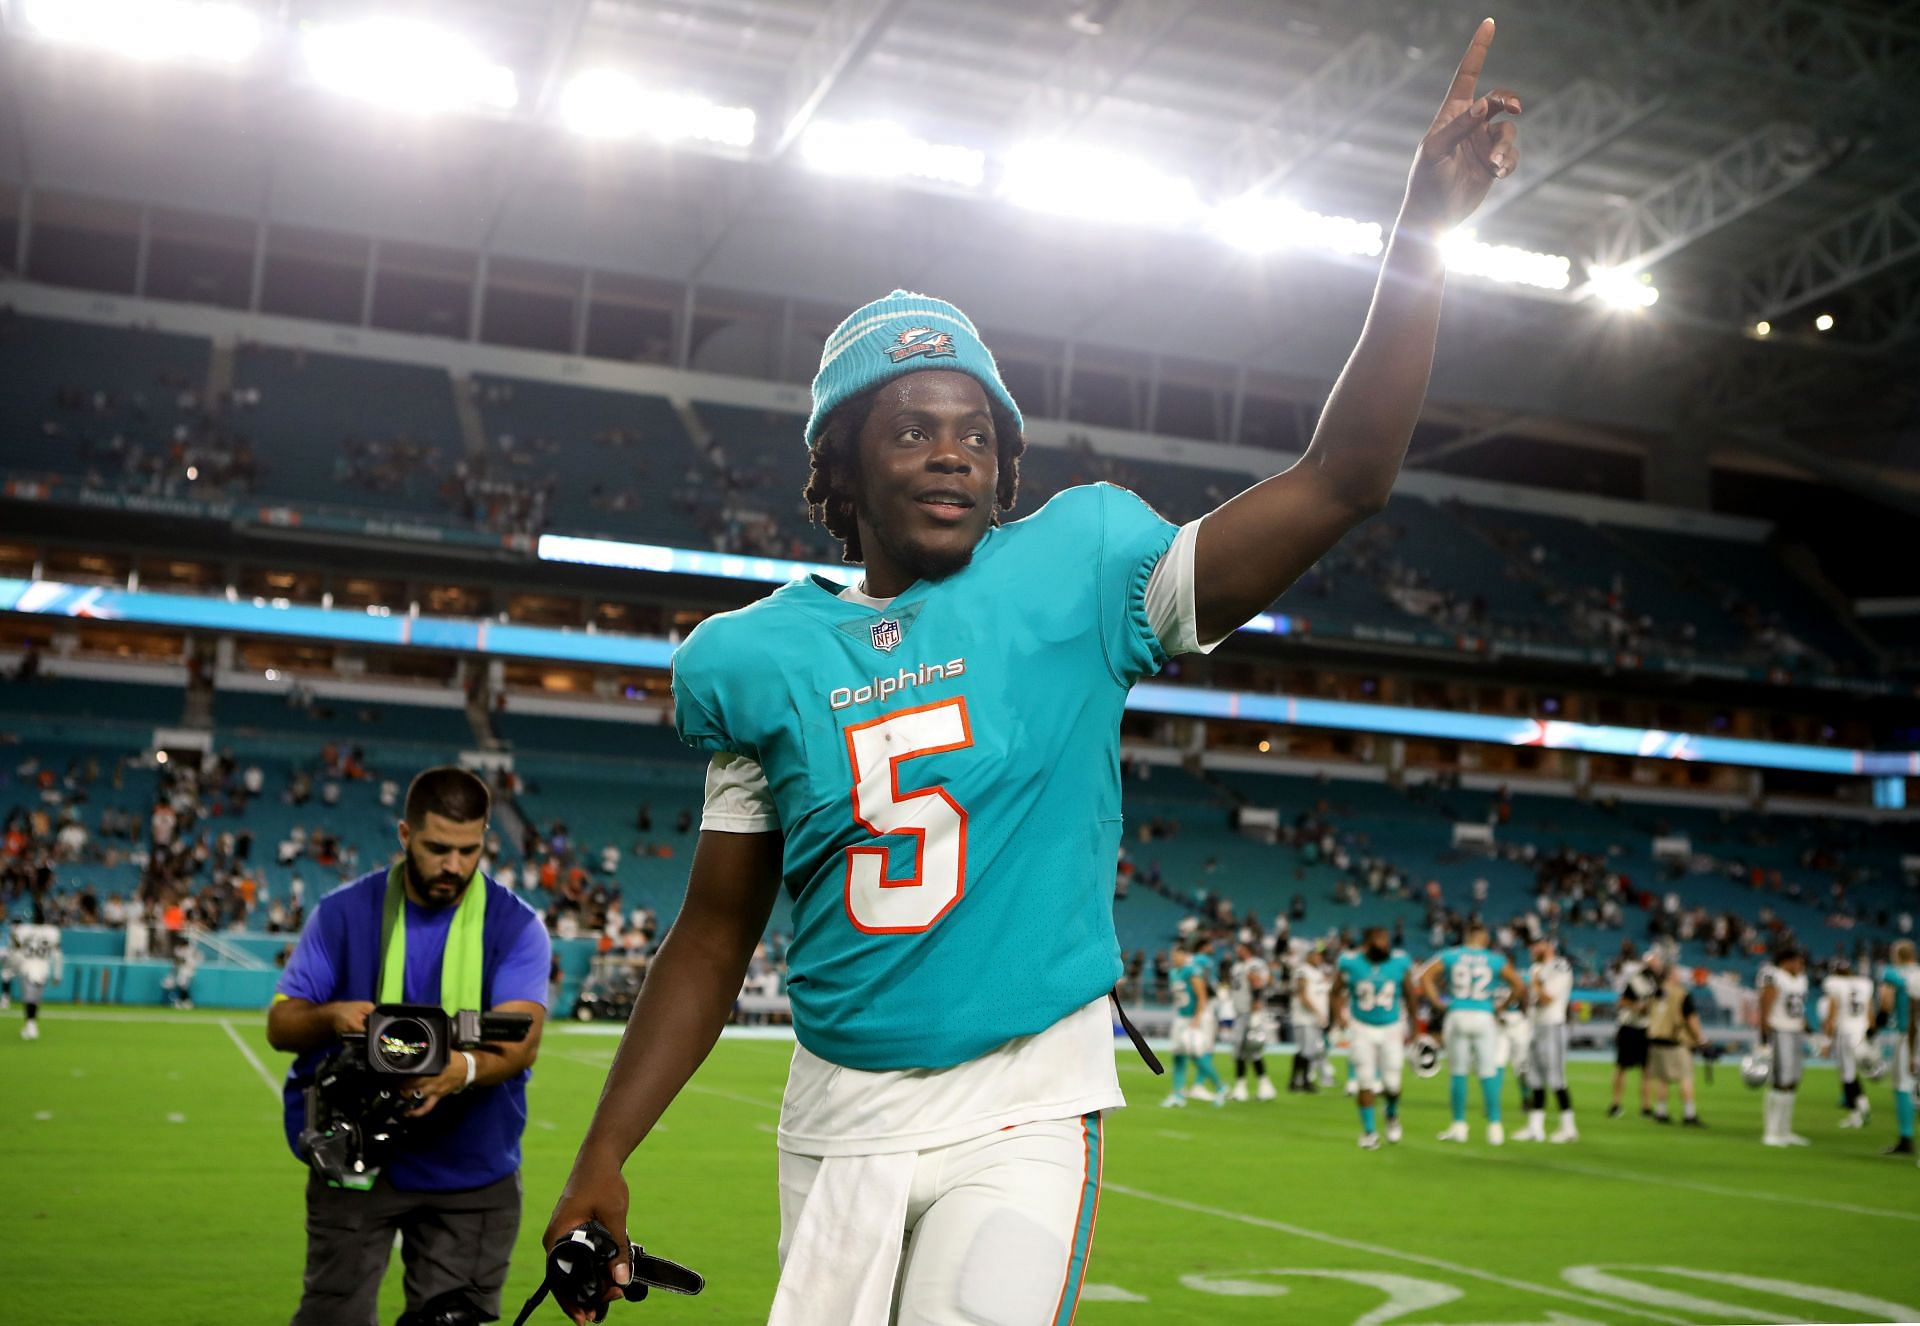 Teddy Bridgewater, Miami Dolphins quarterback, draws up a play for his old  high school team - Sports Illustrated High School News, Analysis and More